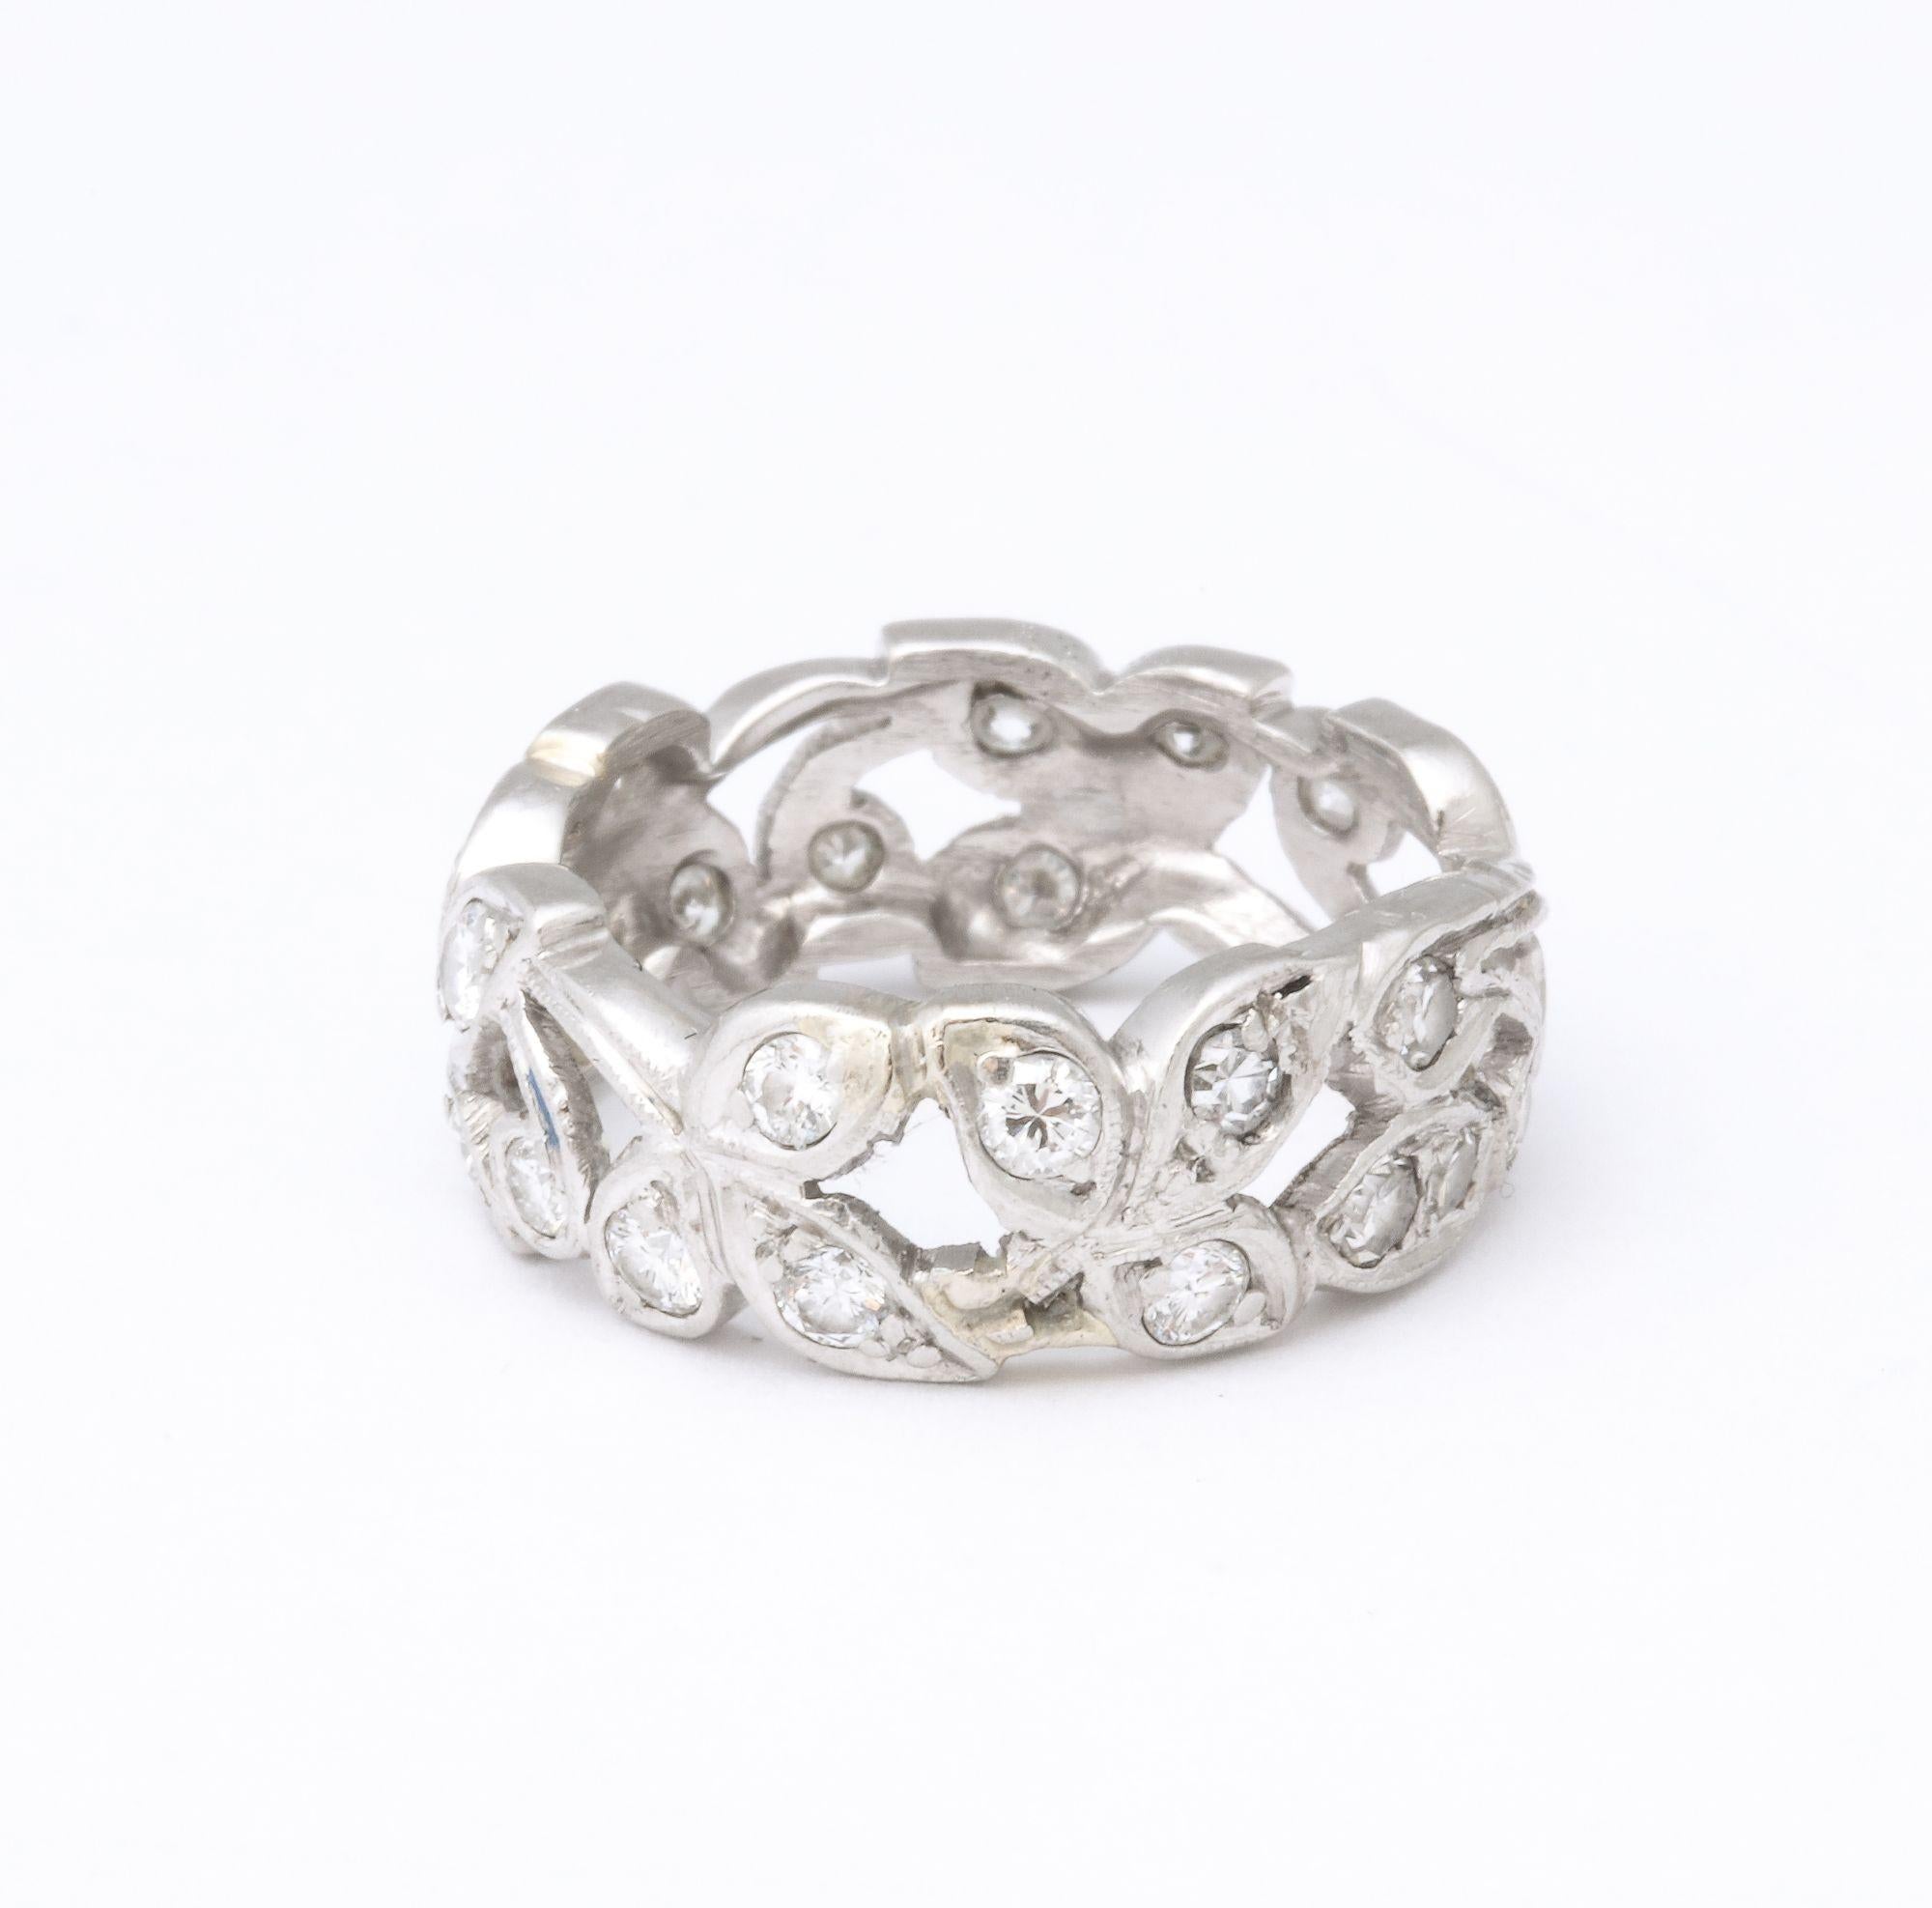 A stunning Platinum Band in a floral pattern with old mine diamonds